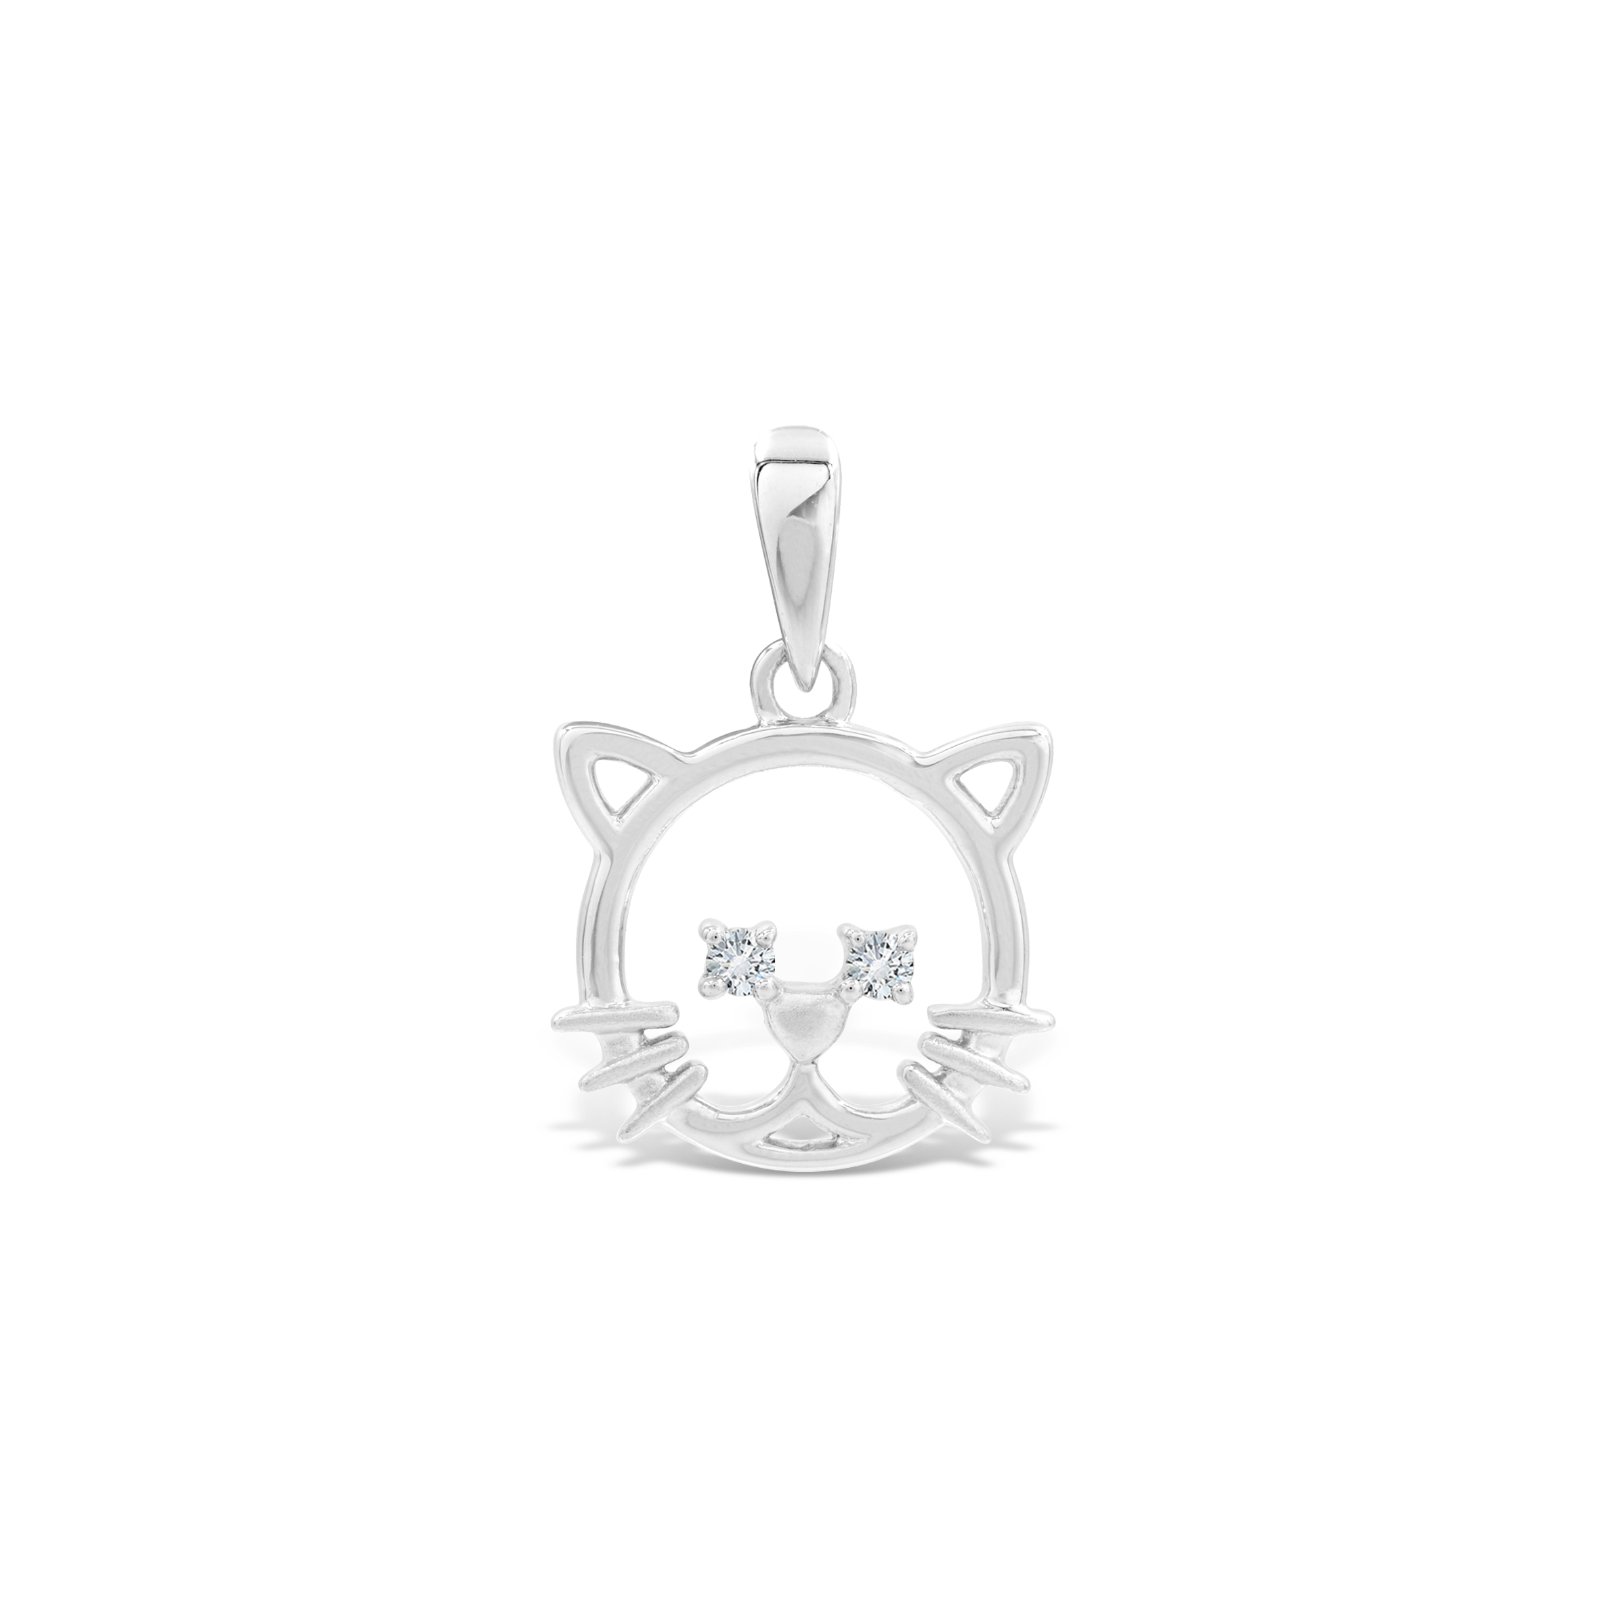 Buy SXNK7 Cat Necklace Silver Tone Sparkly Rainbow Crystal Cat Necklace Cat  Pendant Necklace Jewelry for Women Teen Girls Kids Cat Lover Gifts (color  new2) at Amazon.in